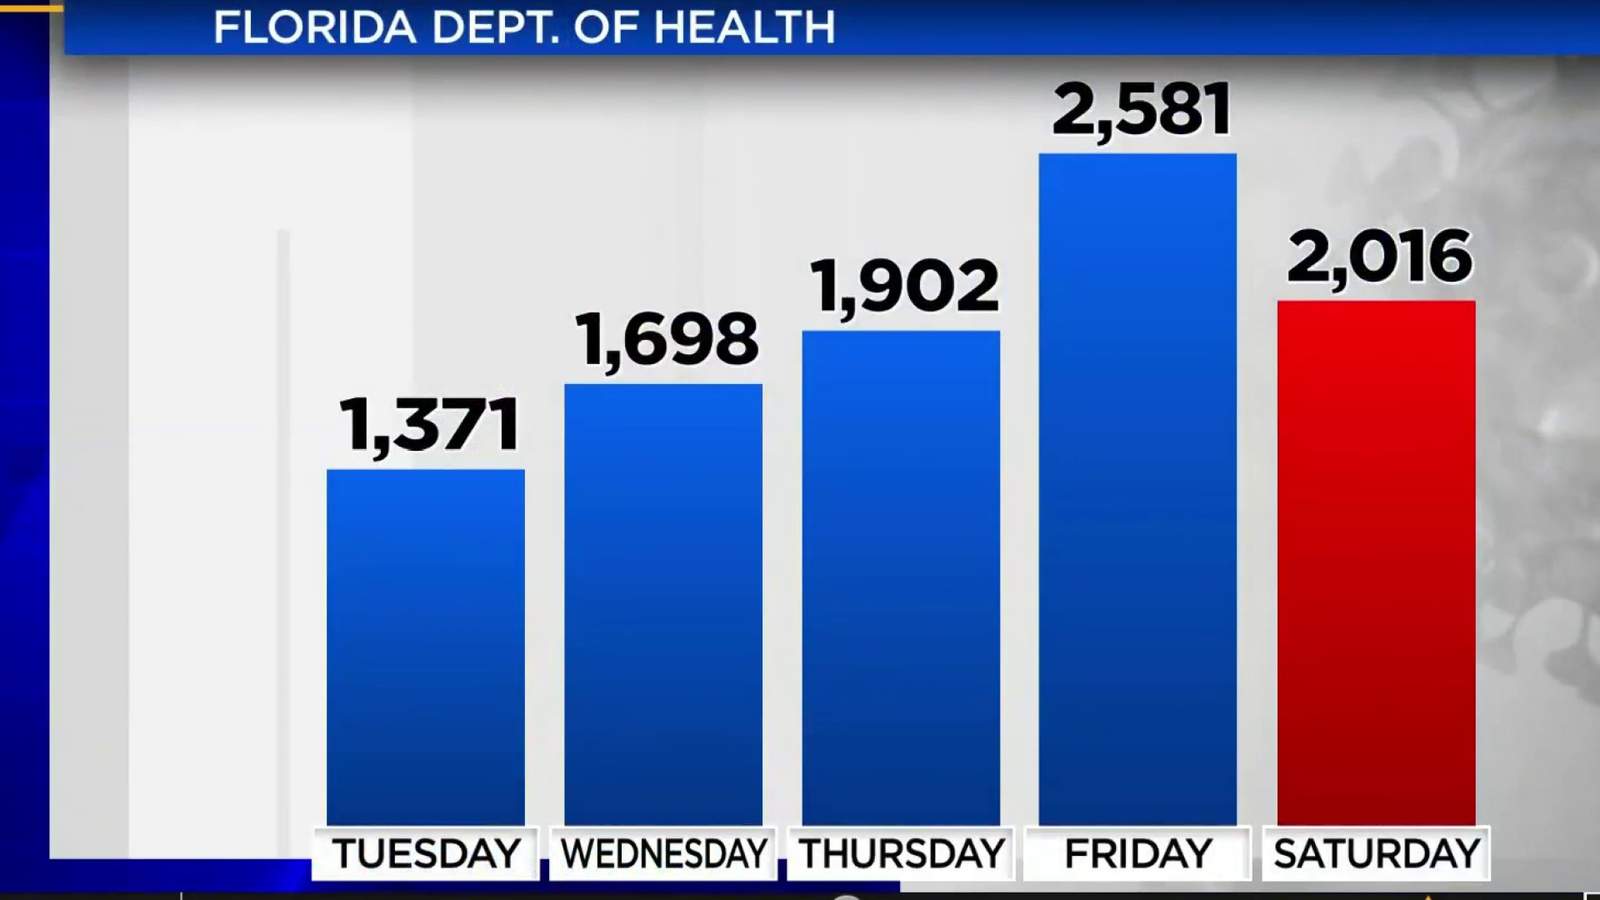 A rise in Coronavirus cases reported by the Florida Dept. of Health